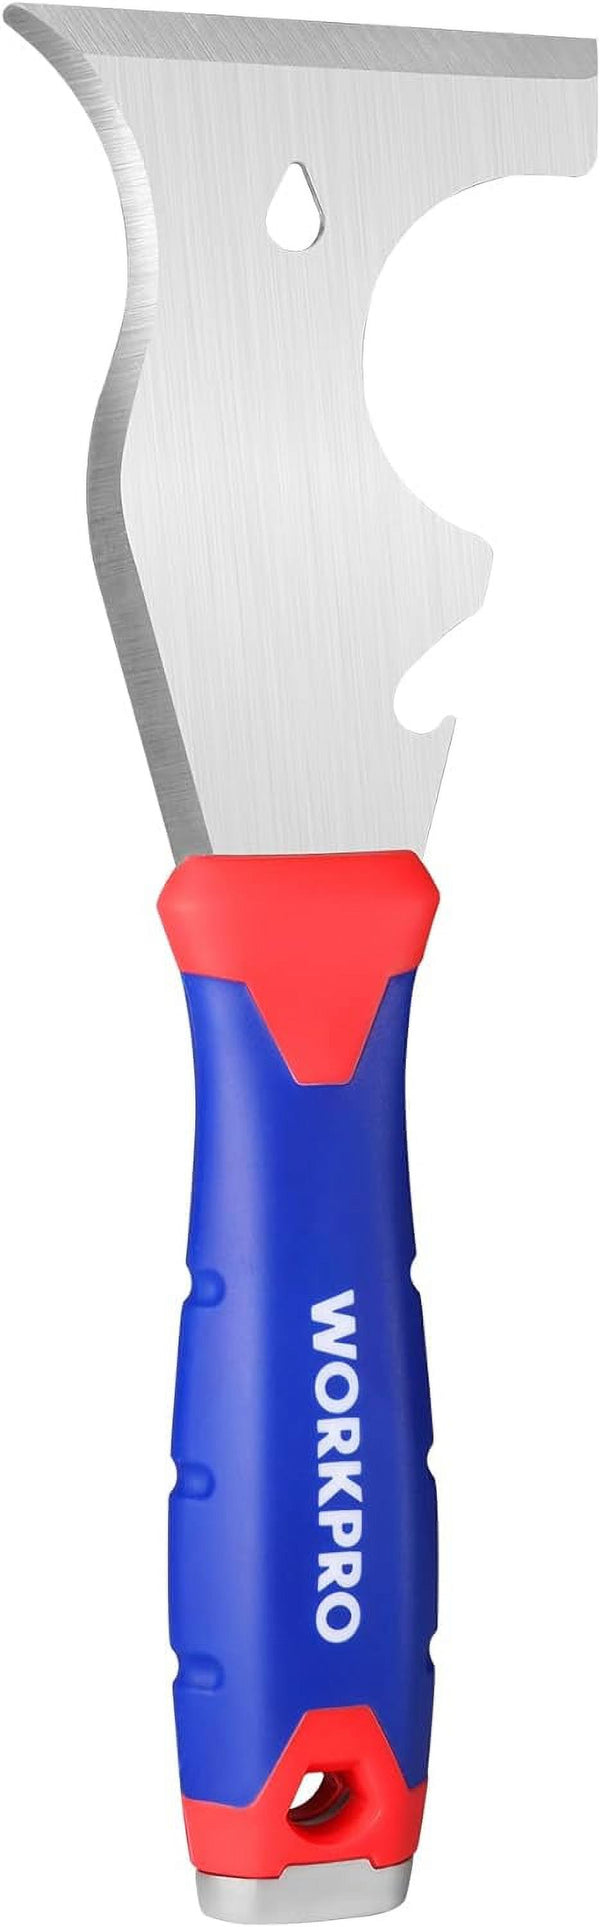 WORKPRO Paint Scraper, 8 in 1 Paint Remover, Metal Putty Knife with Hammer End and Can Opener, Stainless Steel Scraper Tool for Removing Caulk, Painting, Wood and Wallpaper (W)